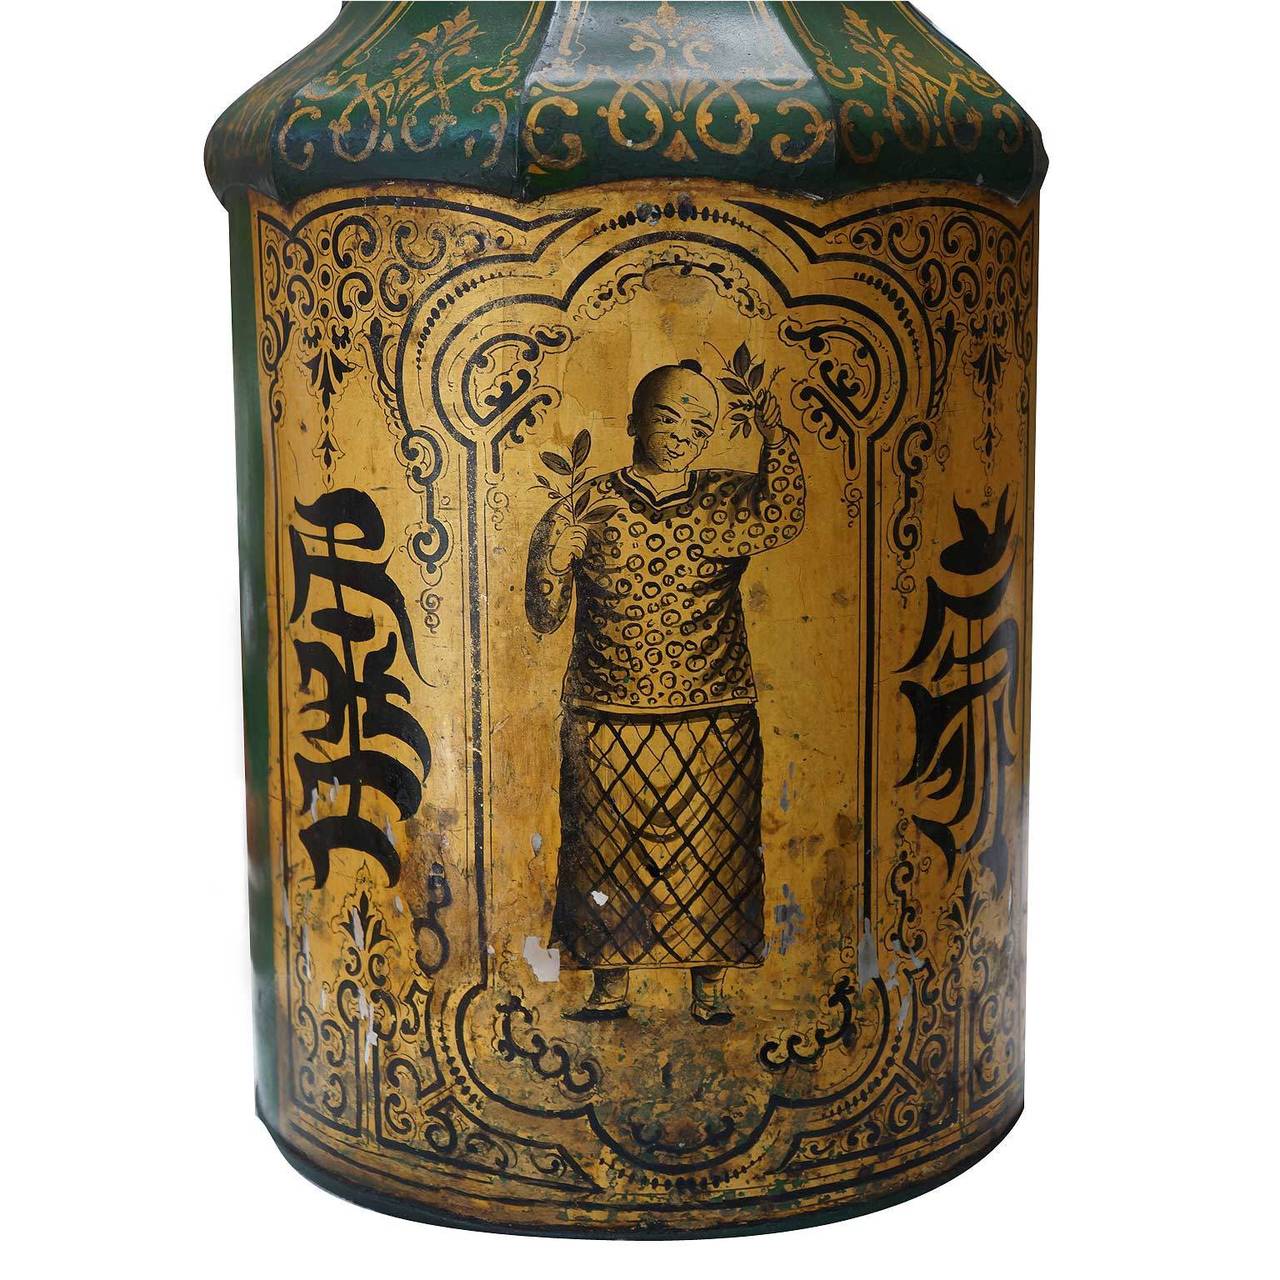 Painted Mid-19th Century English Tea Canister Lamps Decorated in Chinoiserie Style